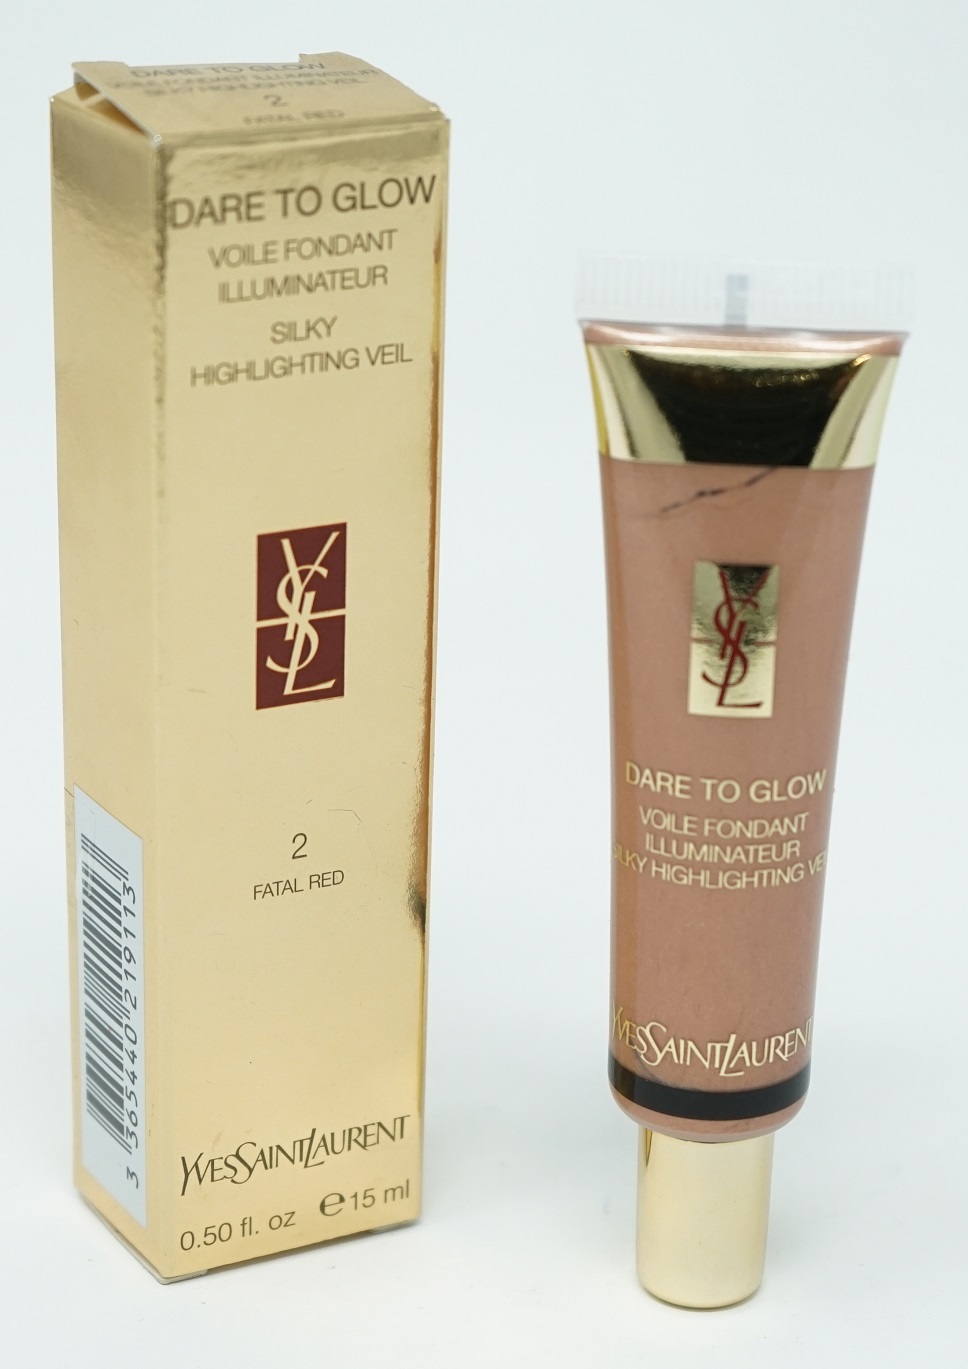 Yves Saint Laurent Dare To Glow Silky Highlighting Veil  2 Fatal Red